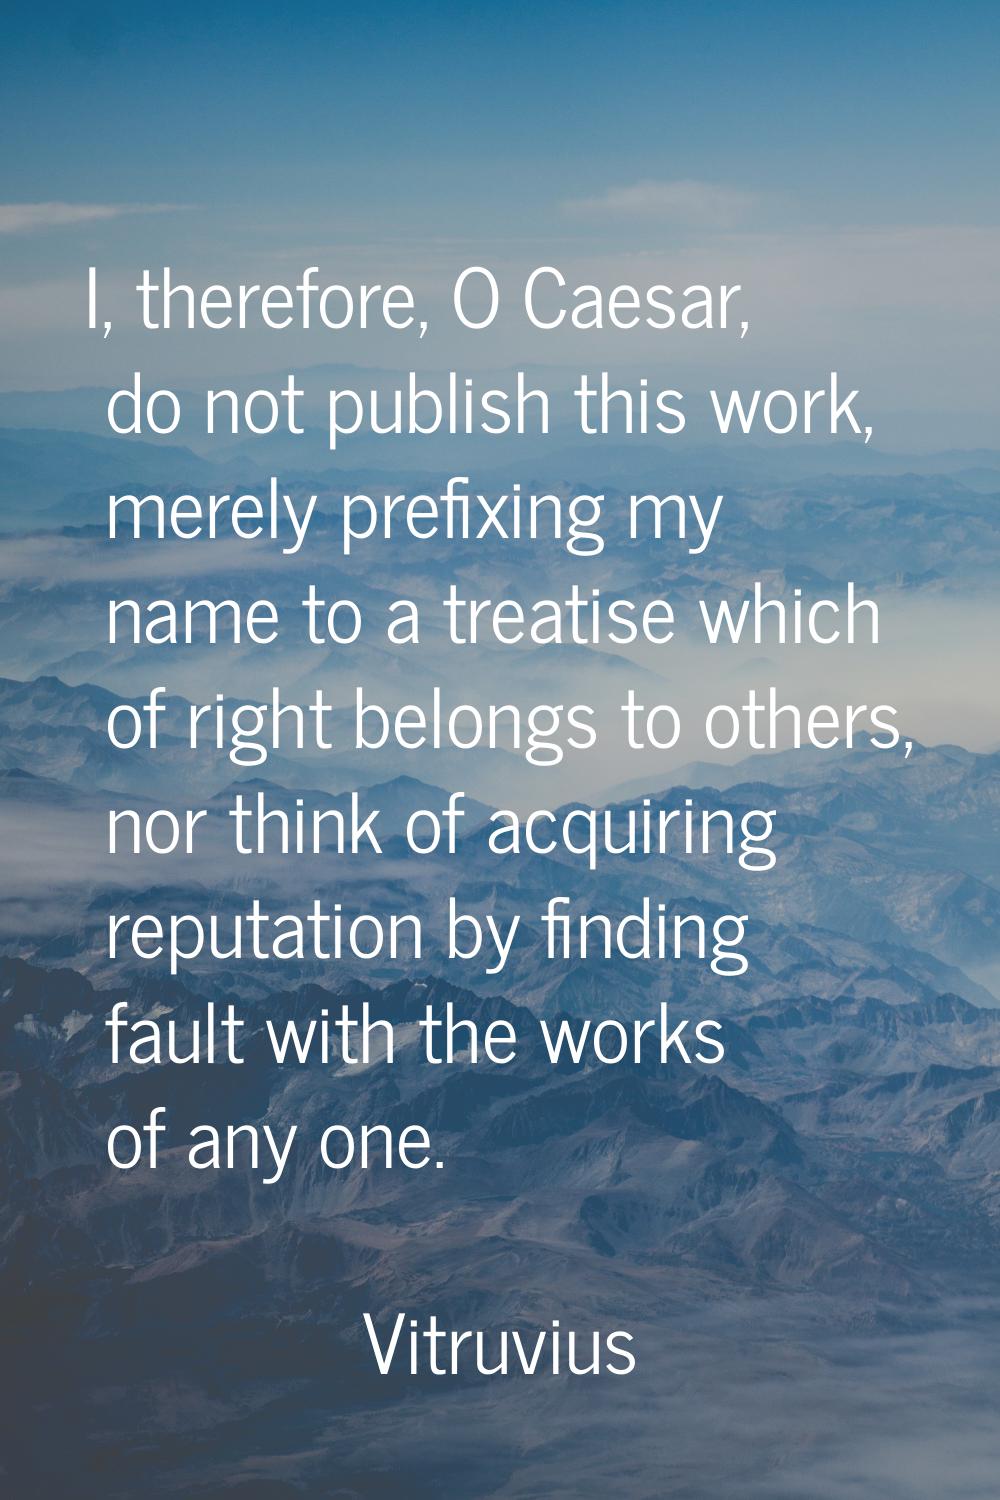 I, therefore, O Caesar, do not publish this work, merely prefixing my name to a treatise which of r